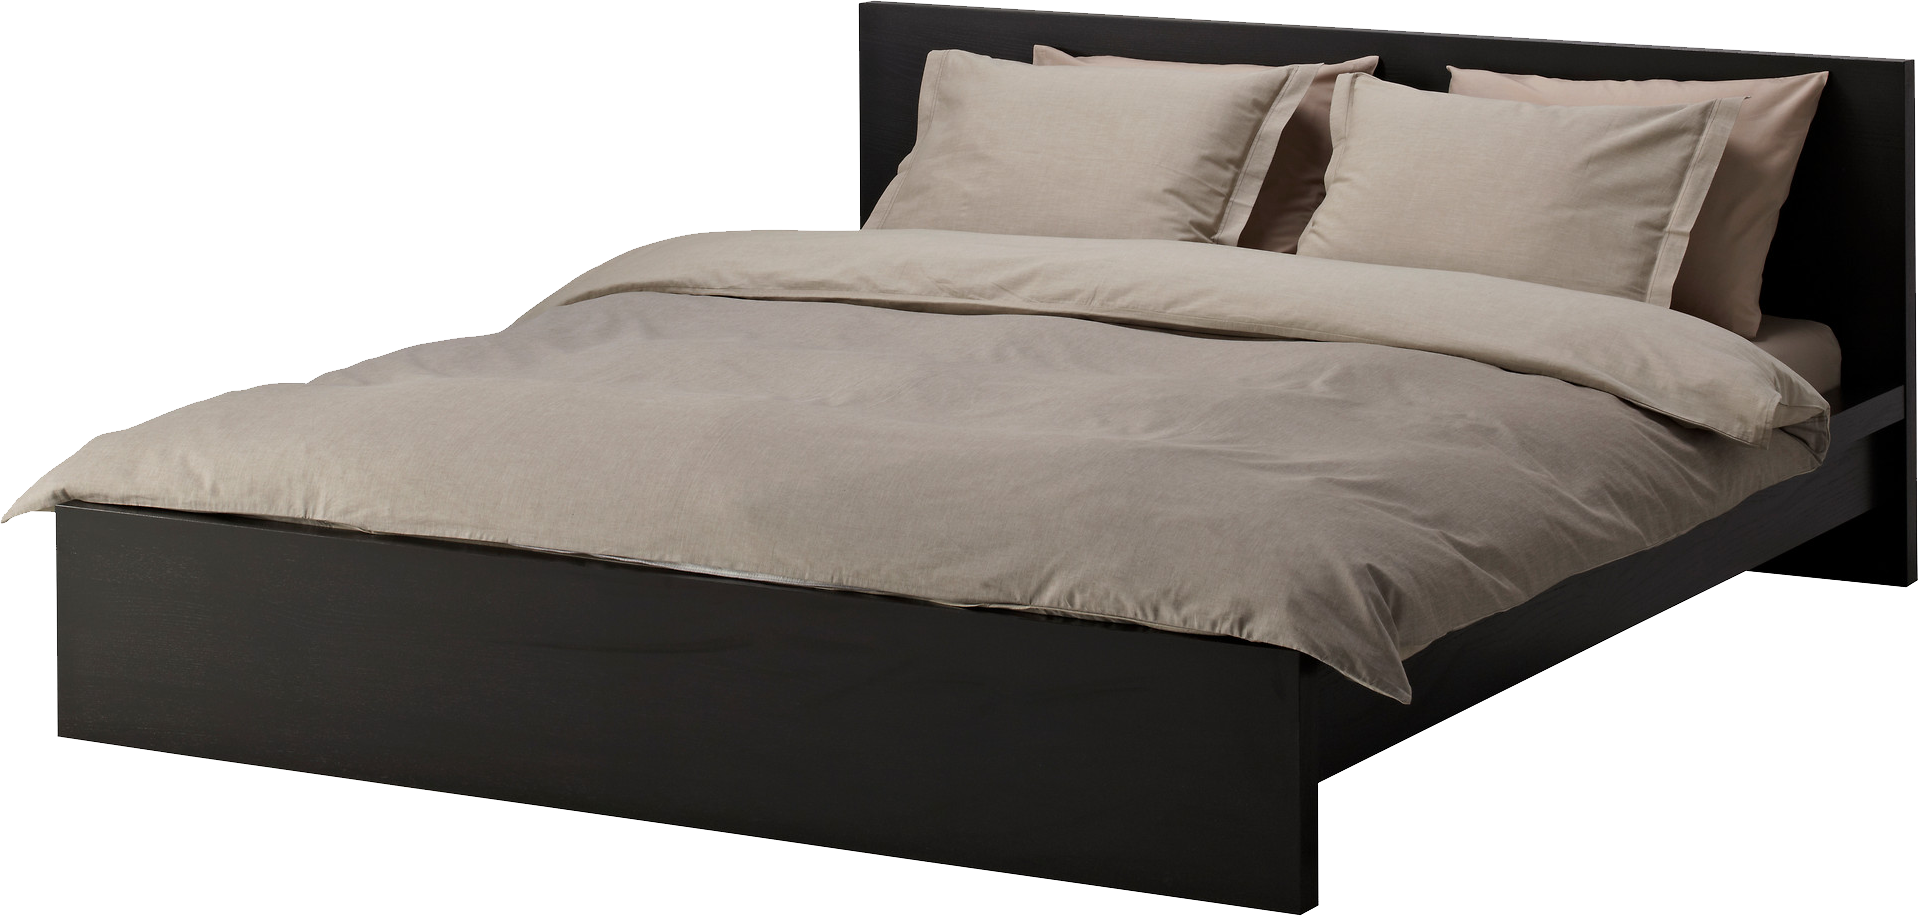 Bed PNG Image.